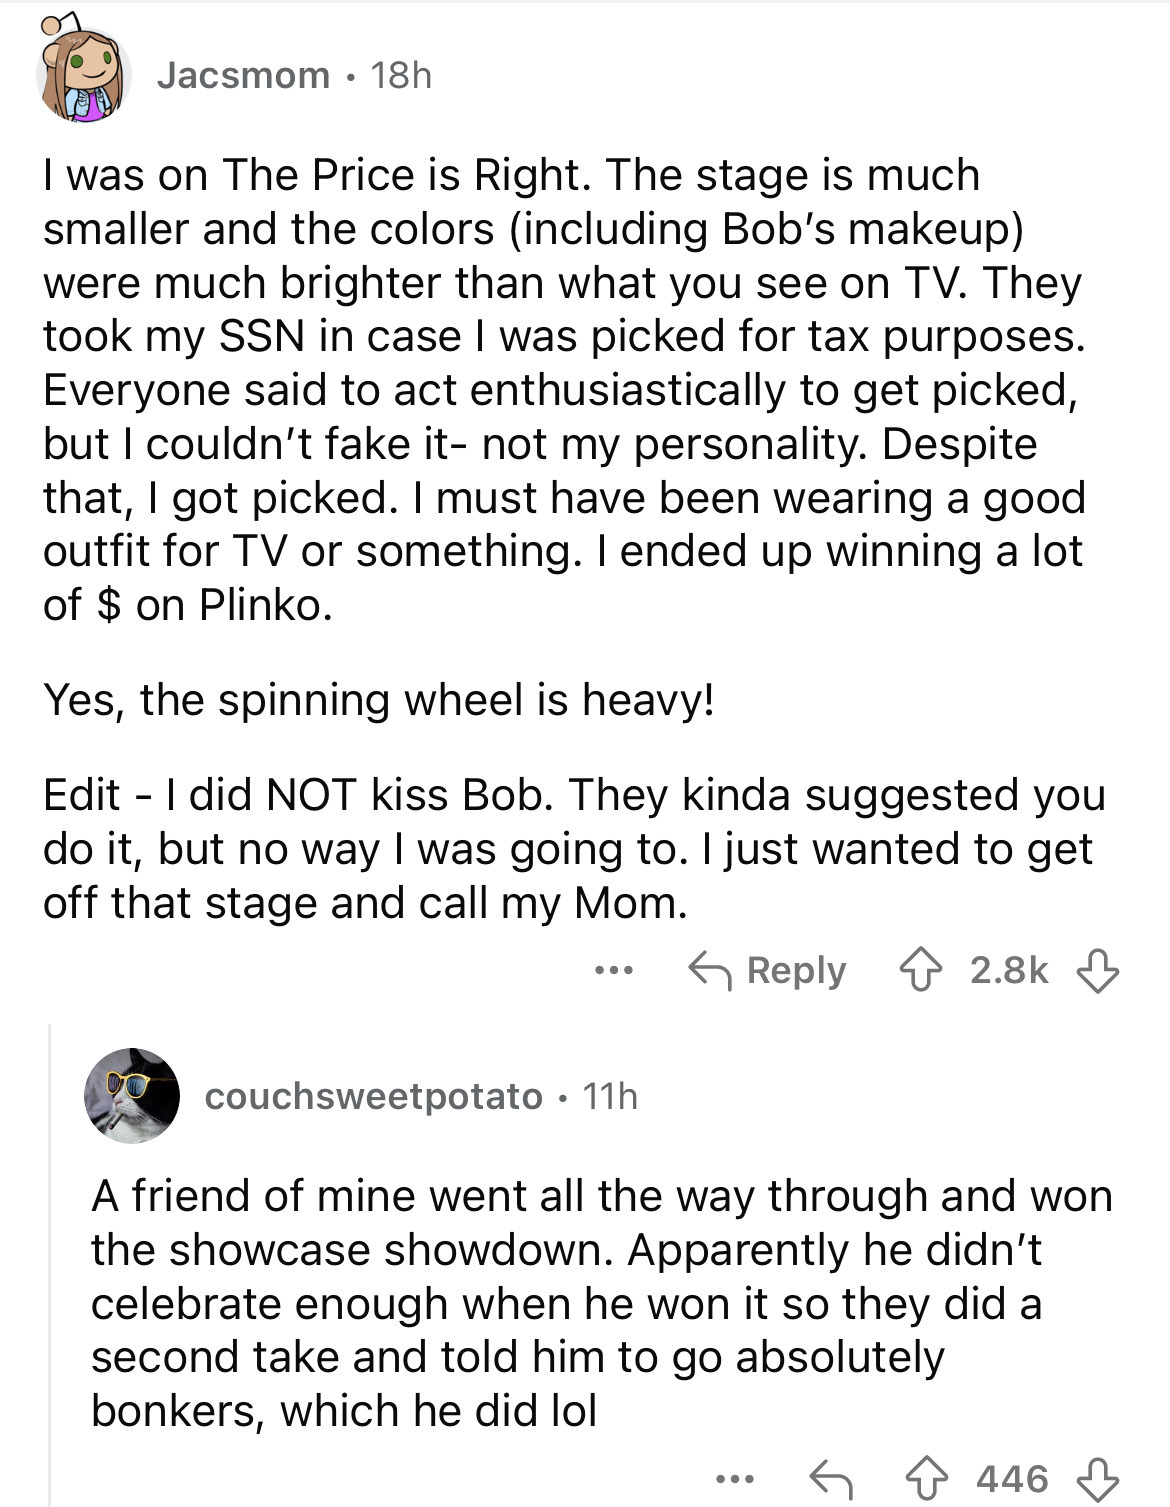 document - Jacsmom 18h I was on The Price is Right. The stage is much smaller and the colors including Bob's makeup were much brighter than what you see on Tv. They took my Ssn in case I was picked for tax purposes. Everyone said to act enthusiastically t